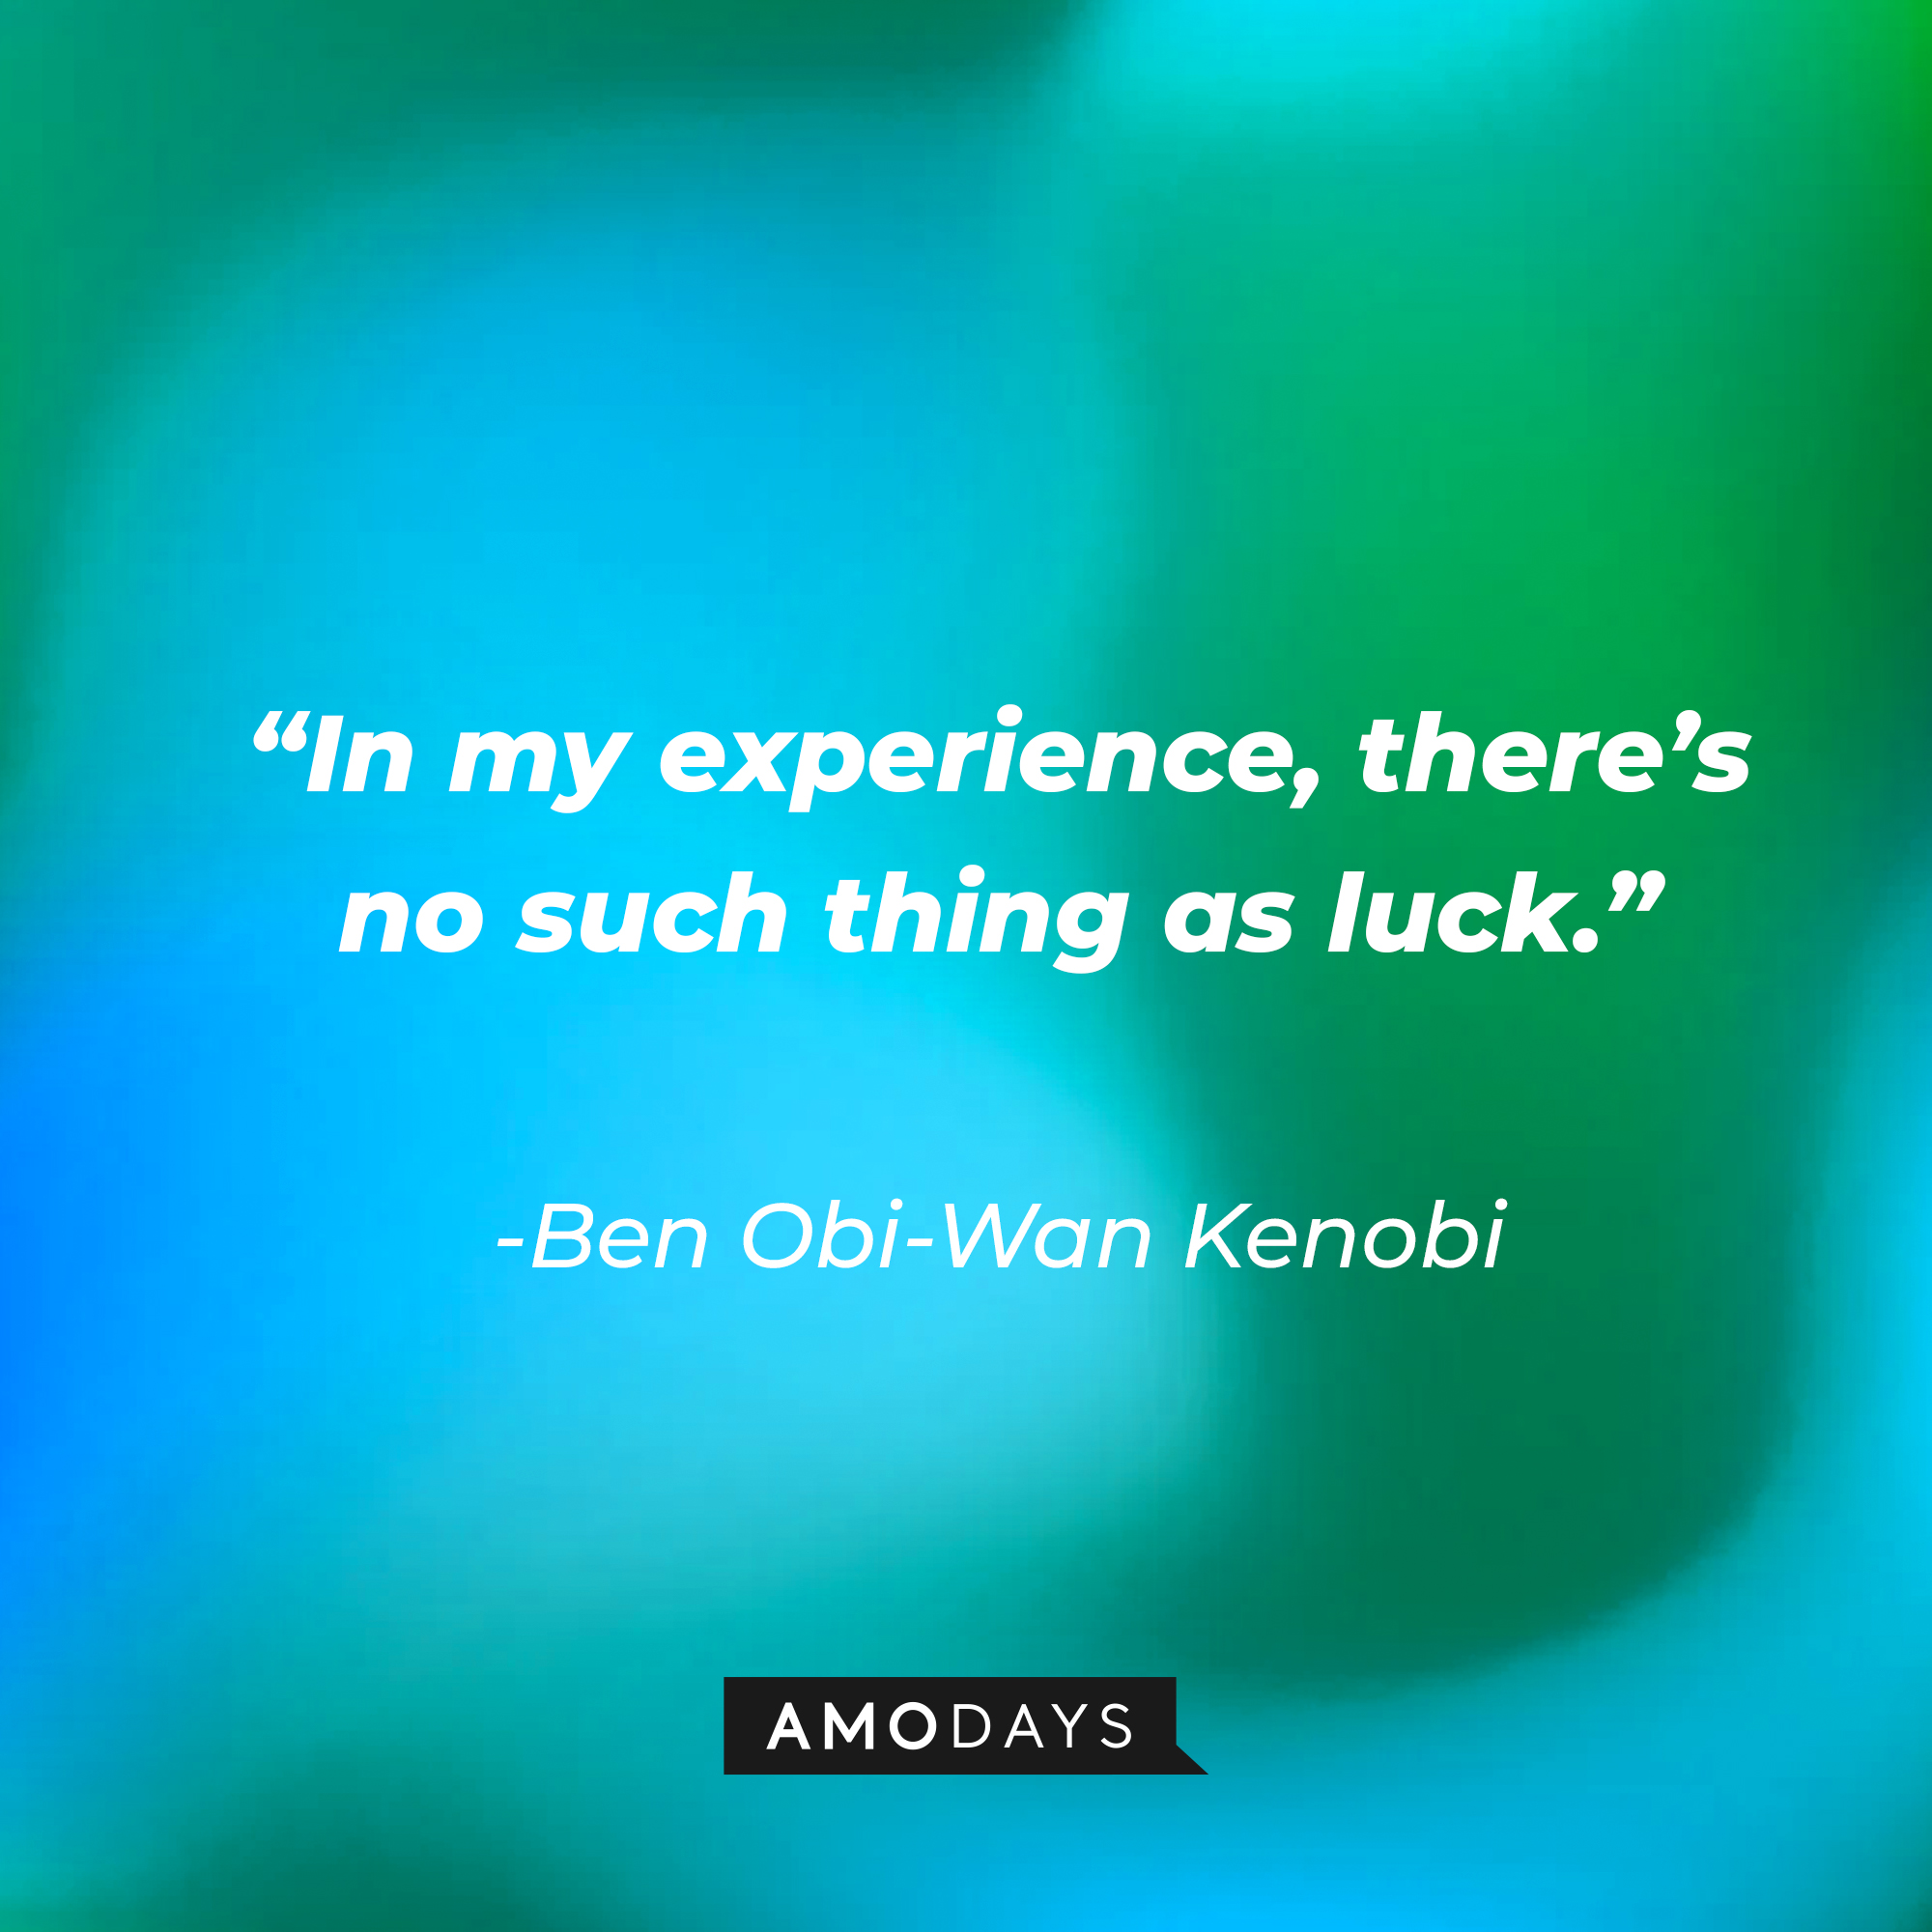 Ben Obi-Wan Kenobi's quote: "In my experience, there's no such thing as luck." | Source: facebook.com/StarWars